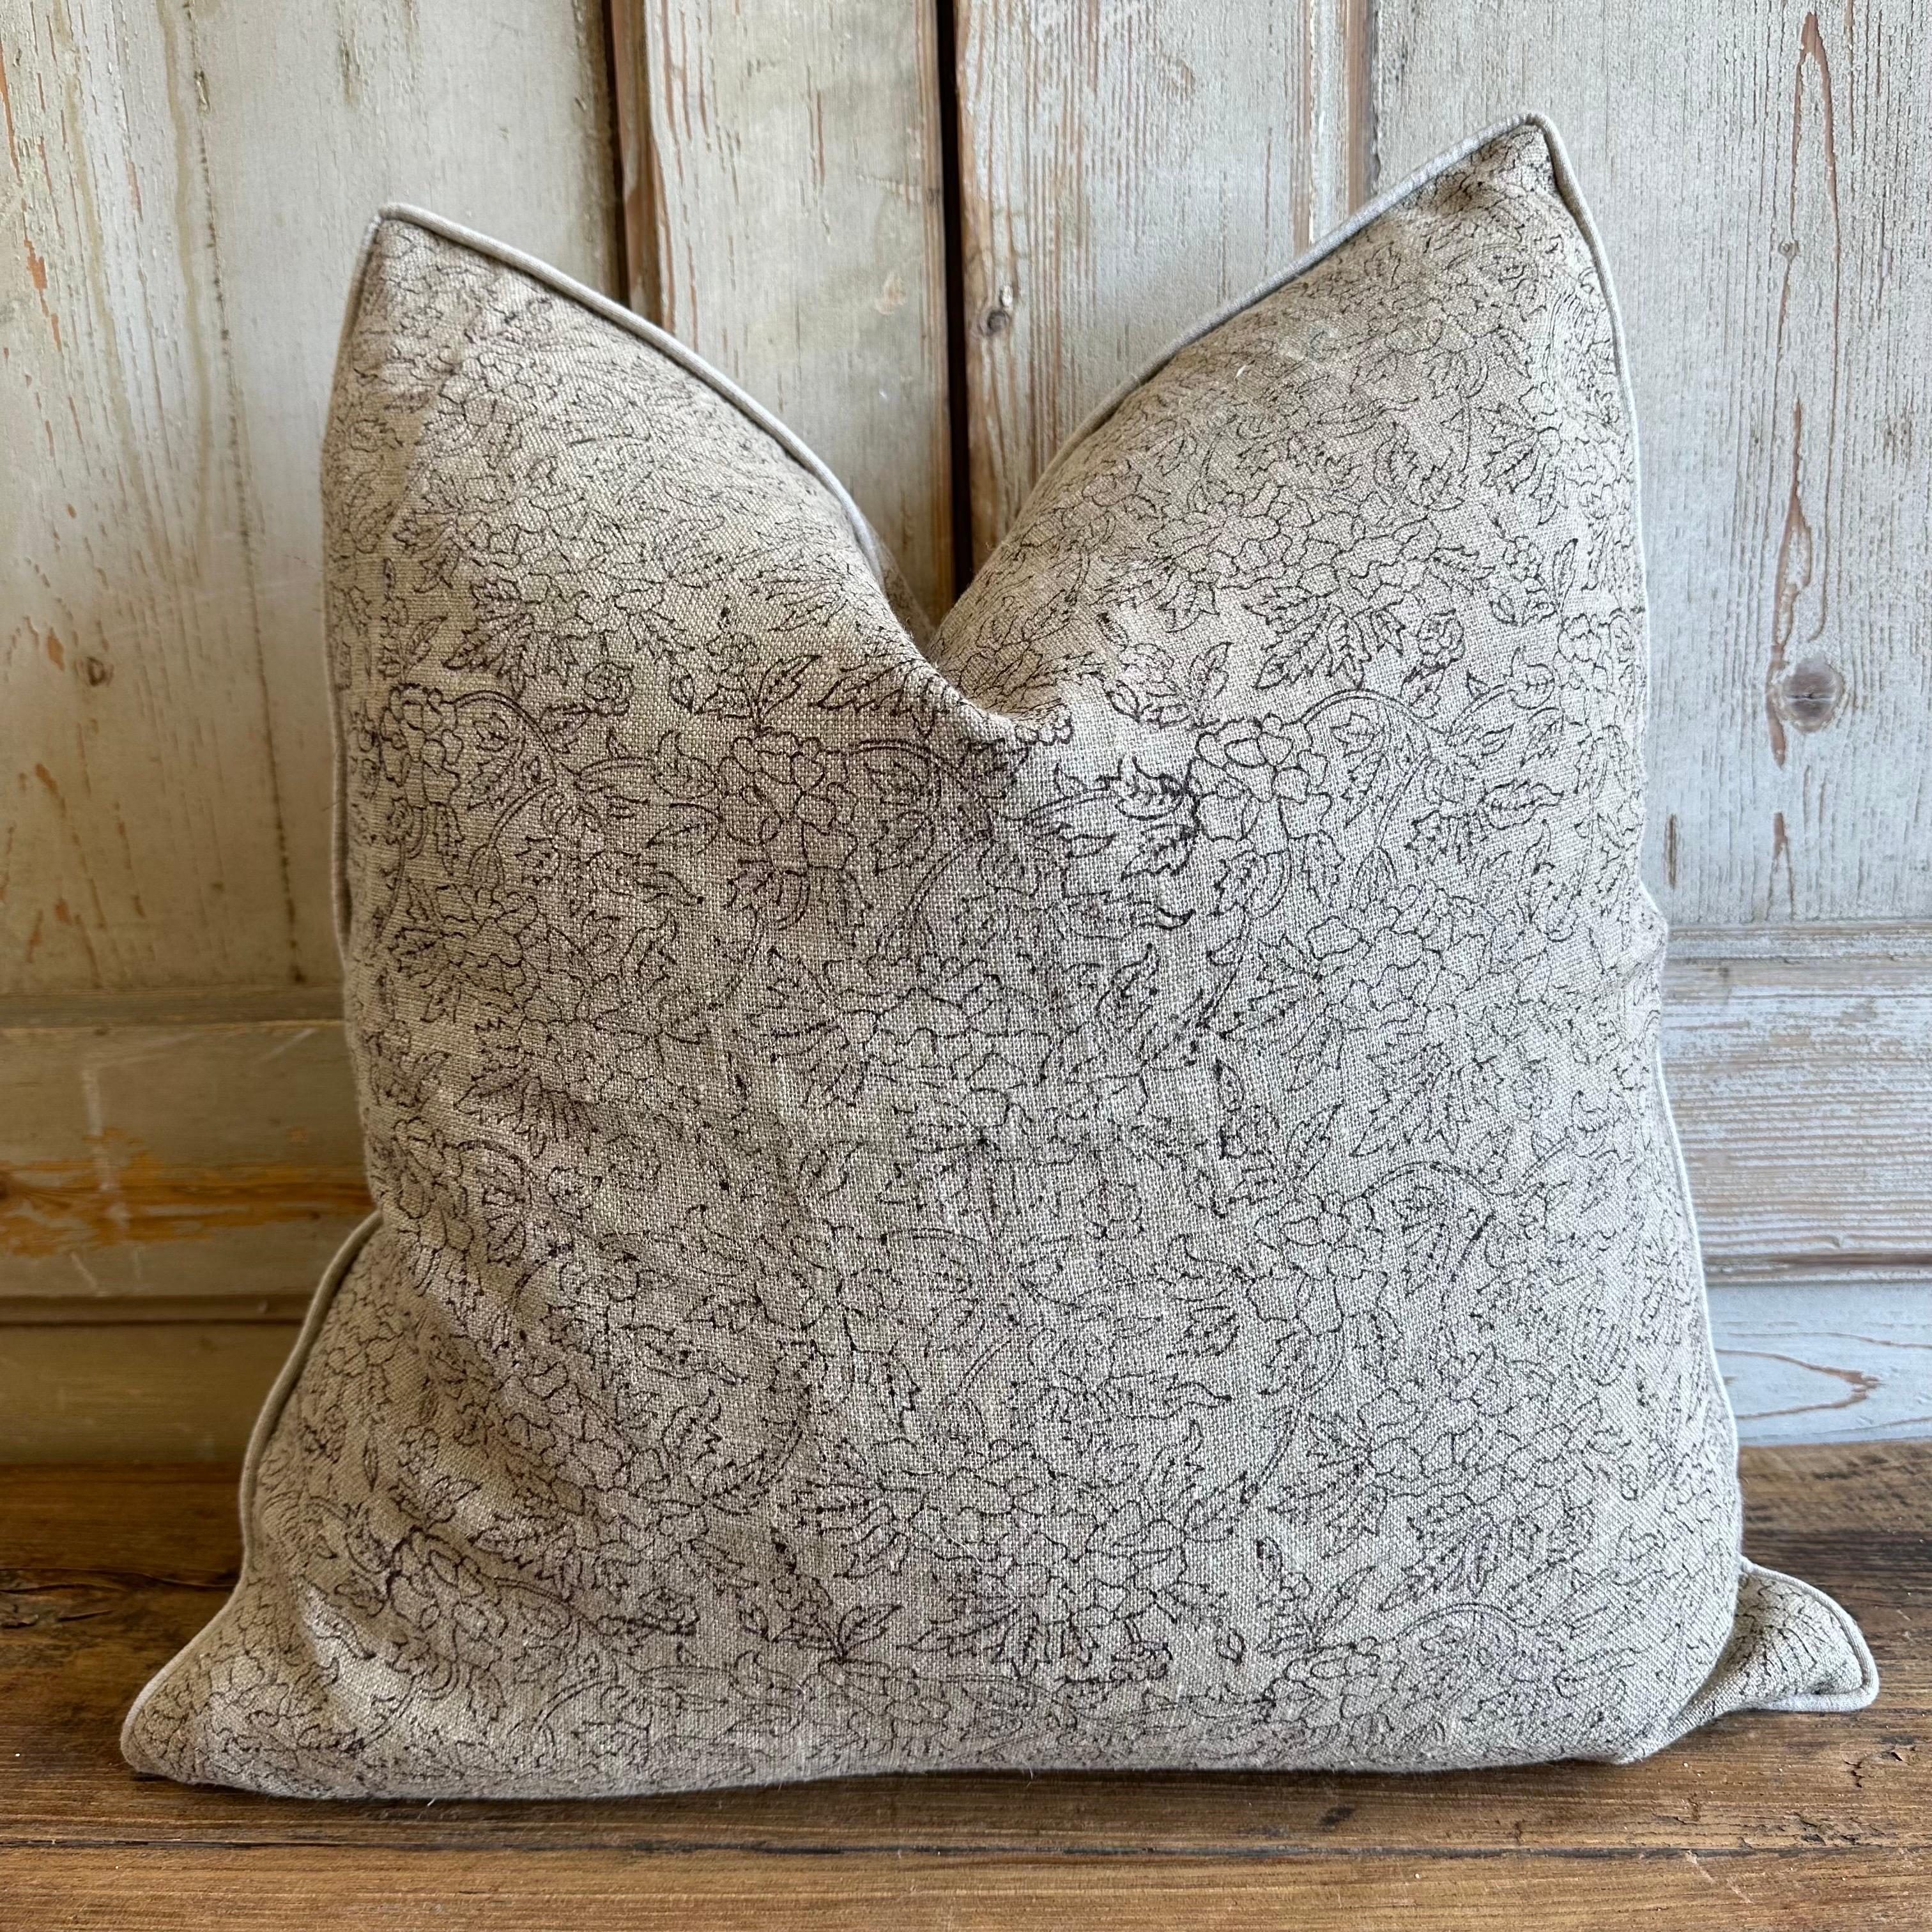 Beautifully hand block-printed pillow on linen fabric. Featuring a botanical pattern in the color Coco brown.
Zipper closure, with welt edge, double sided print/reversible.
Down/ Feather insert is included.
Care Instructions: Dry clean